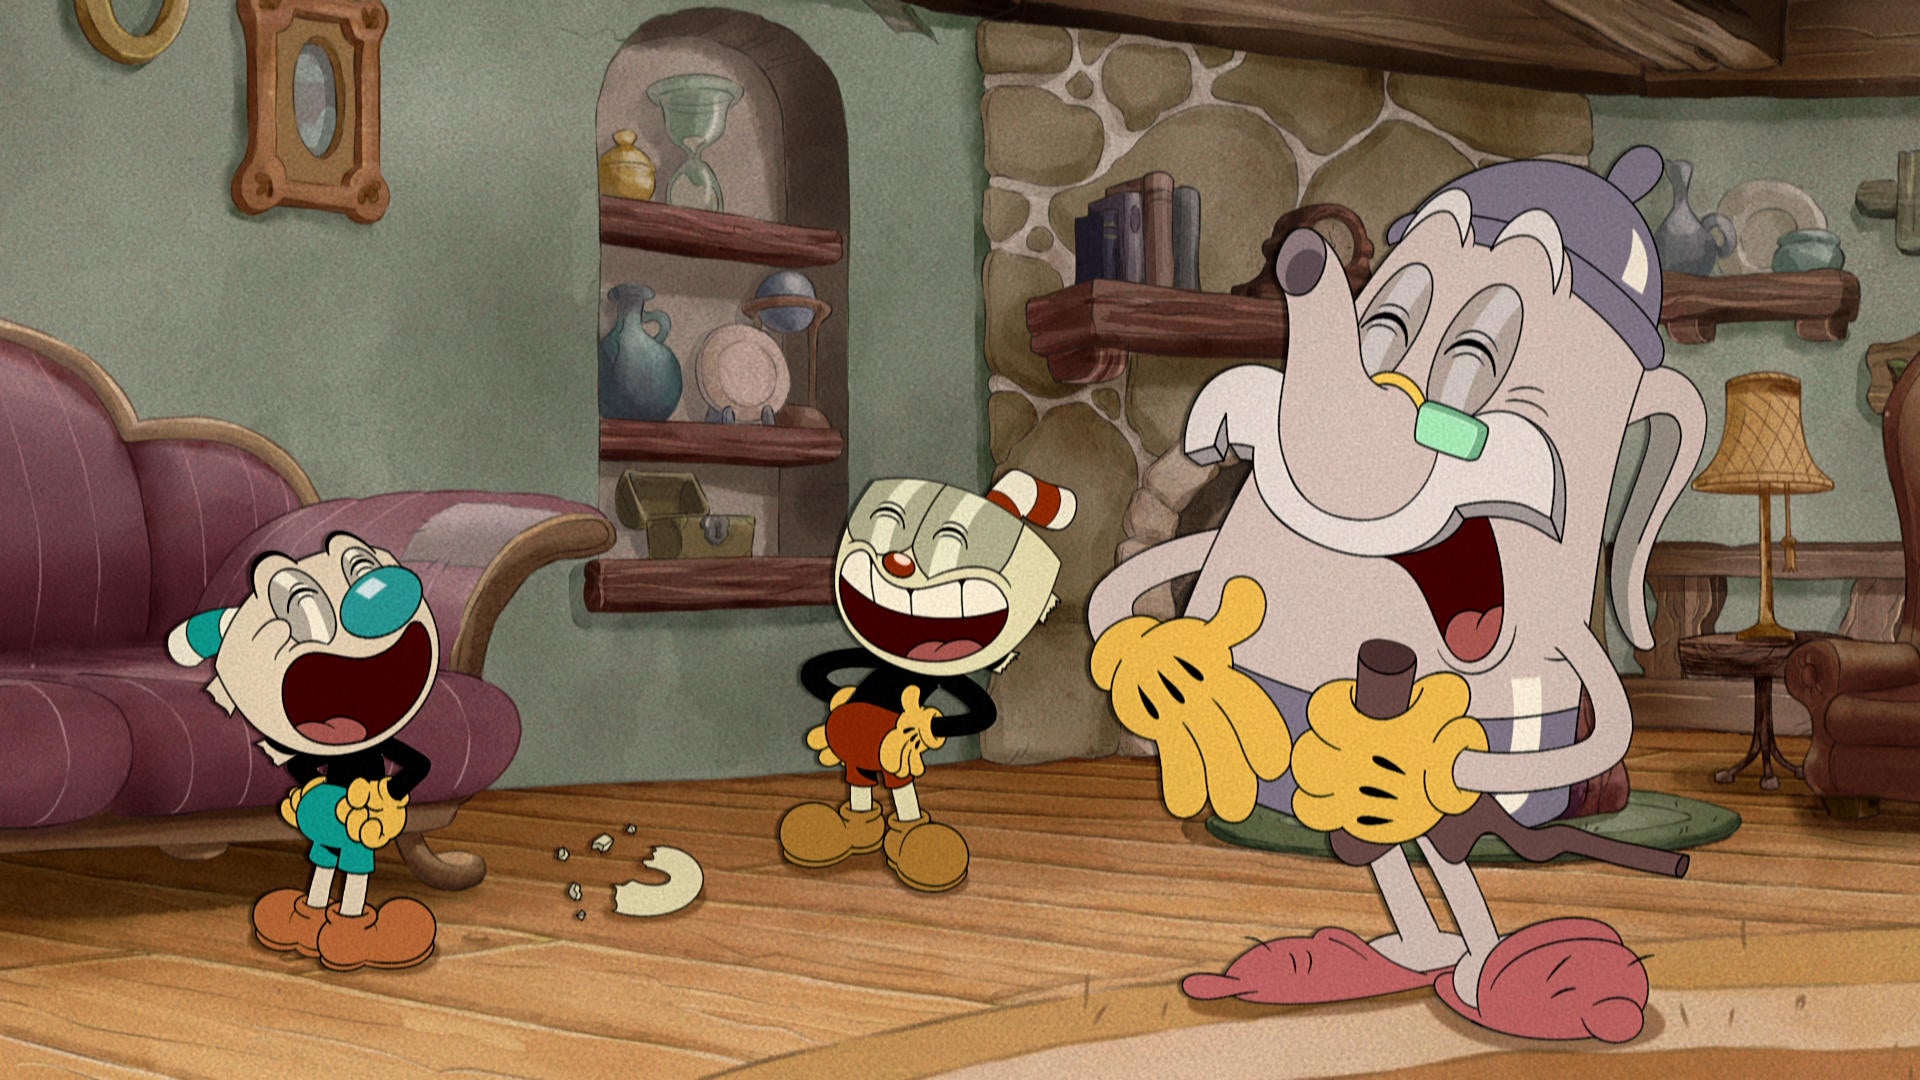 Netflix Releases Wild New Trailer for Season 2 of THE CUPHEAD SHOW